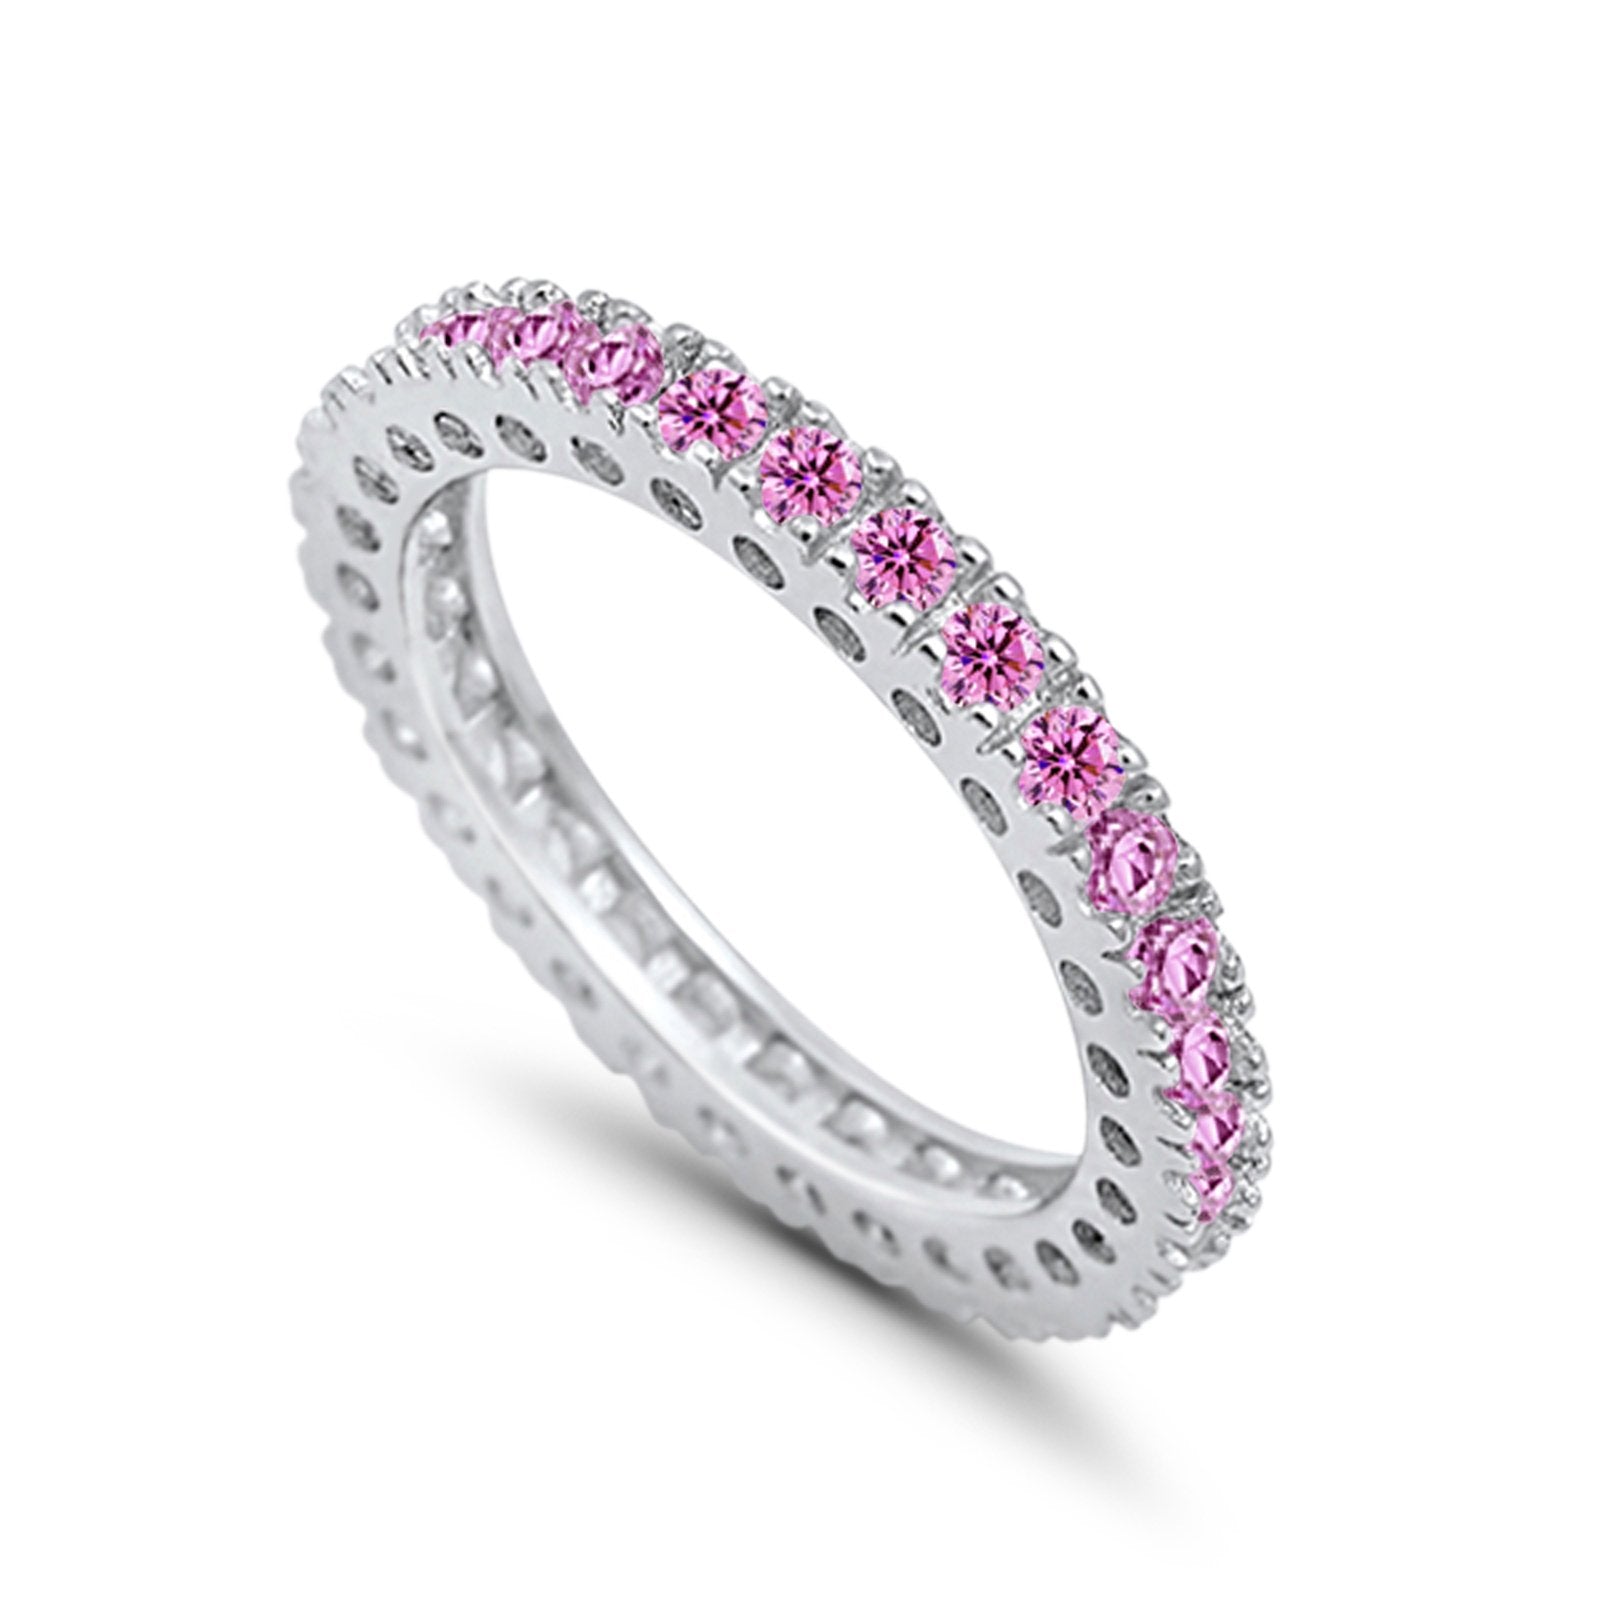 Eternity Wedding Band Rings Round Simulated Pink CZ 925 Sterling Silver